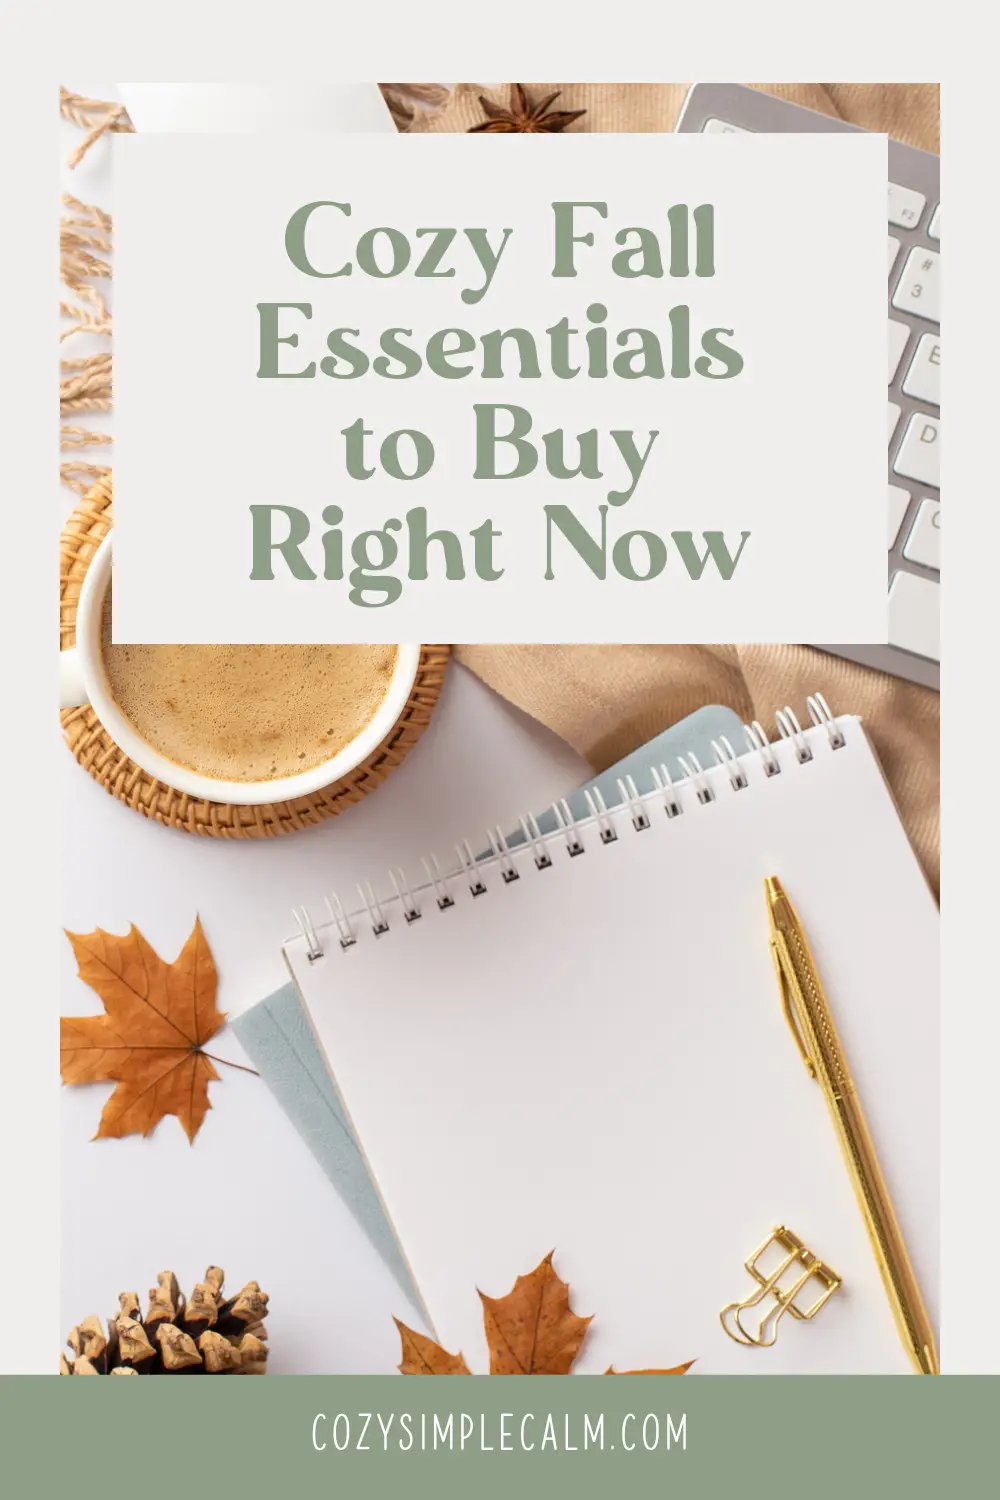 Image of blank notepad and pin with fall leaves and coffee - Text overlay: Cozy Fall Essentials to Buy Right Now - cozysimplecalm.com